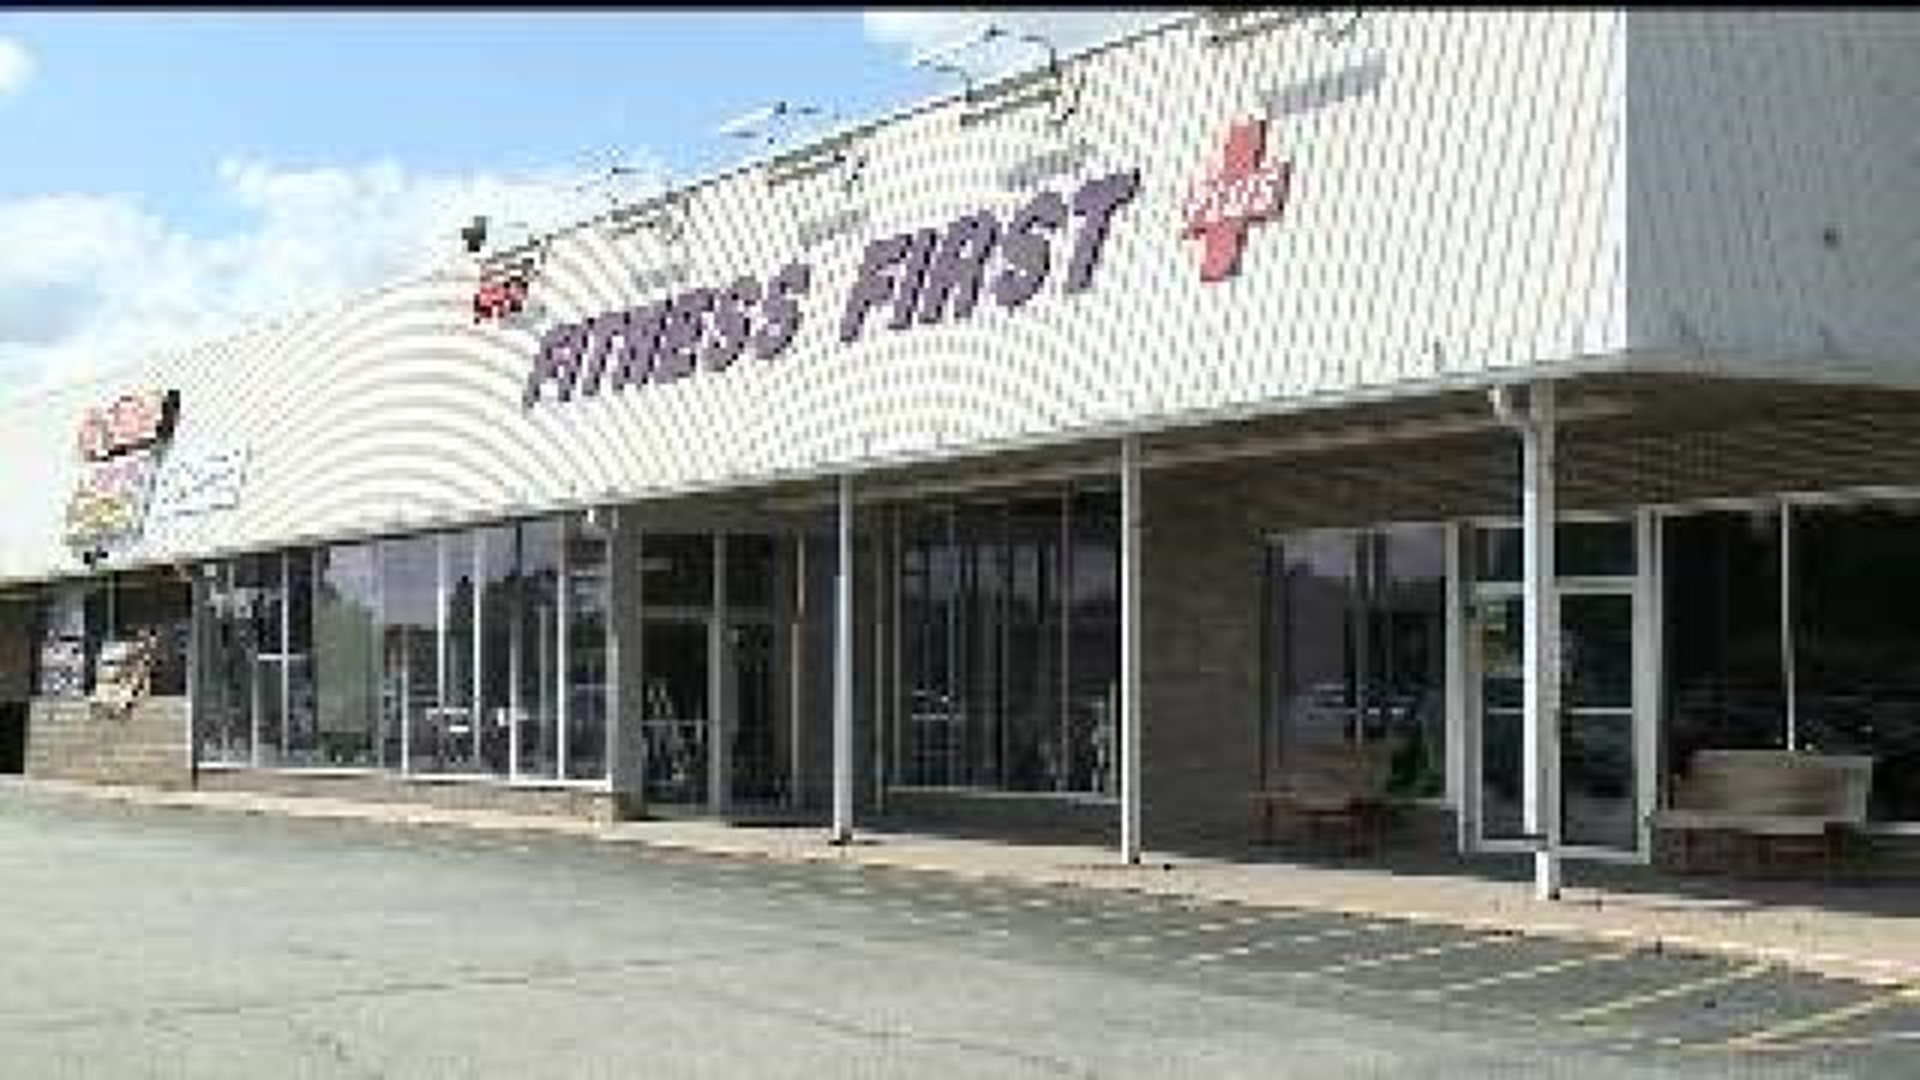 Gym members left with questions after closing